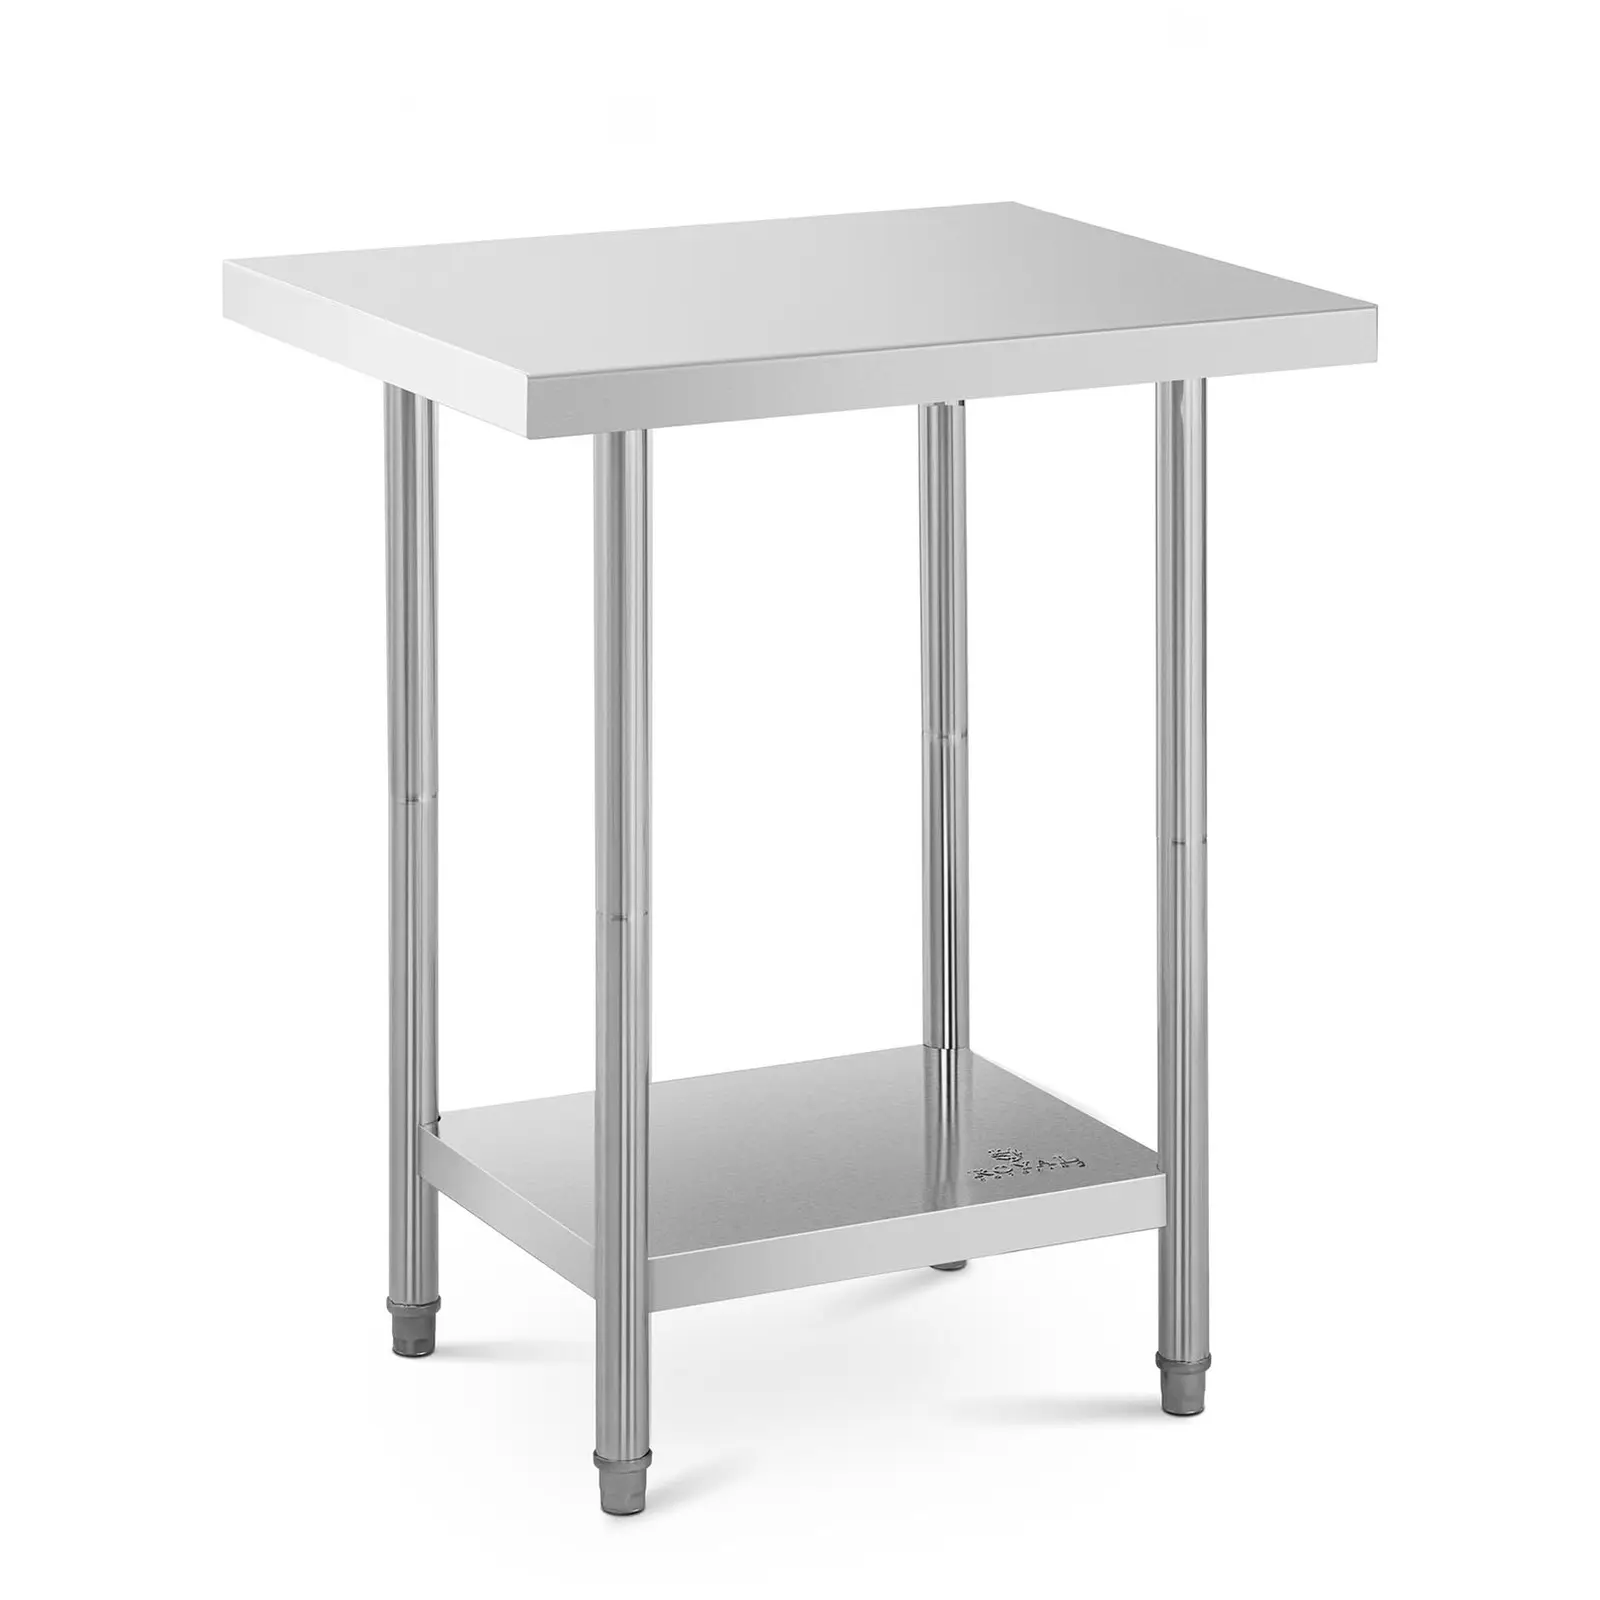 Stainless Steel Work Table - 76 x 61 cm - Royal Catering - 400 kg load capacity